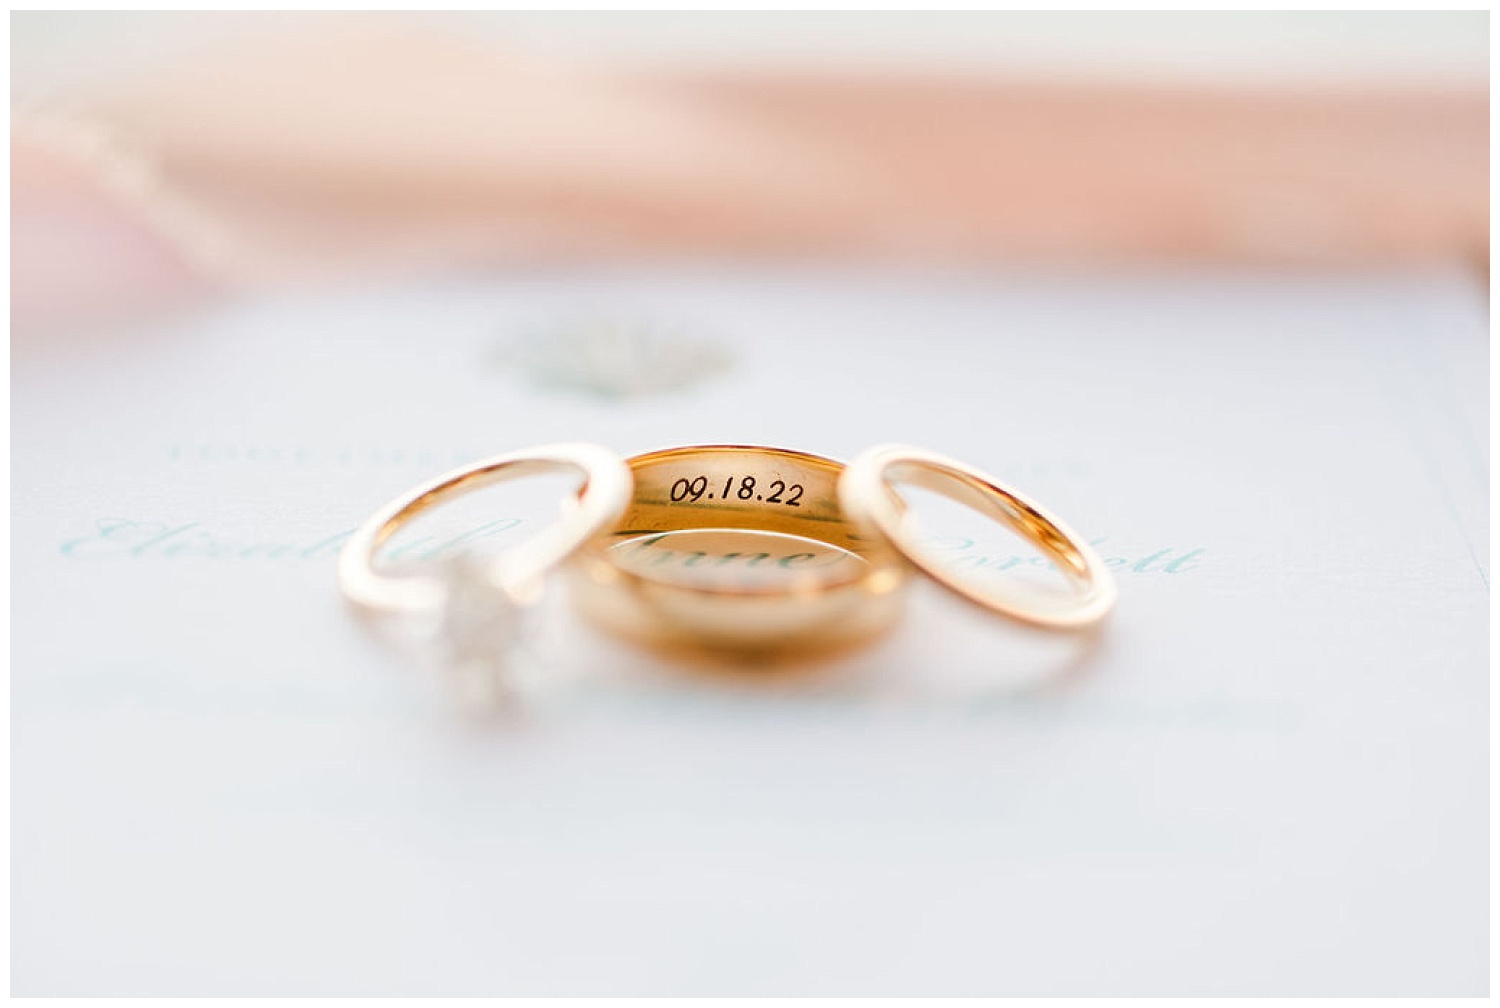 all three wedding rings with the date shown on the inside of the ring